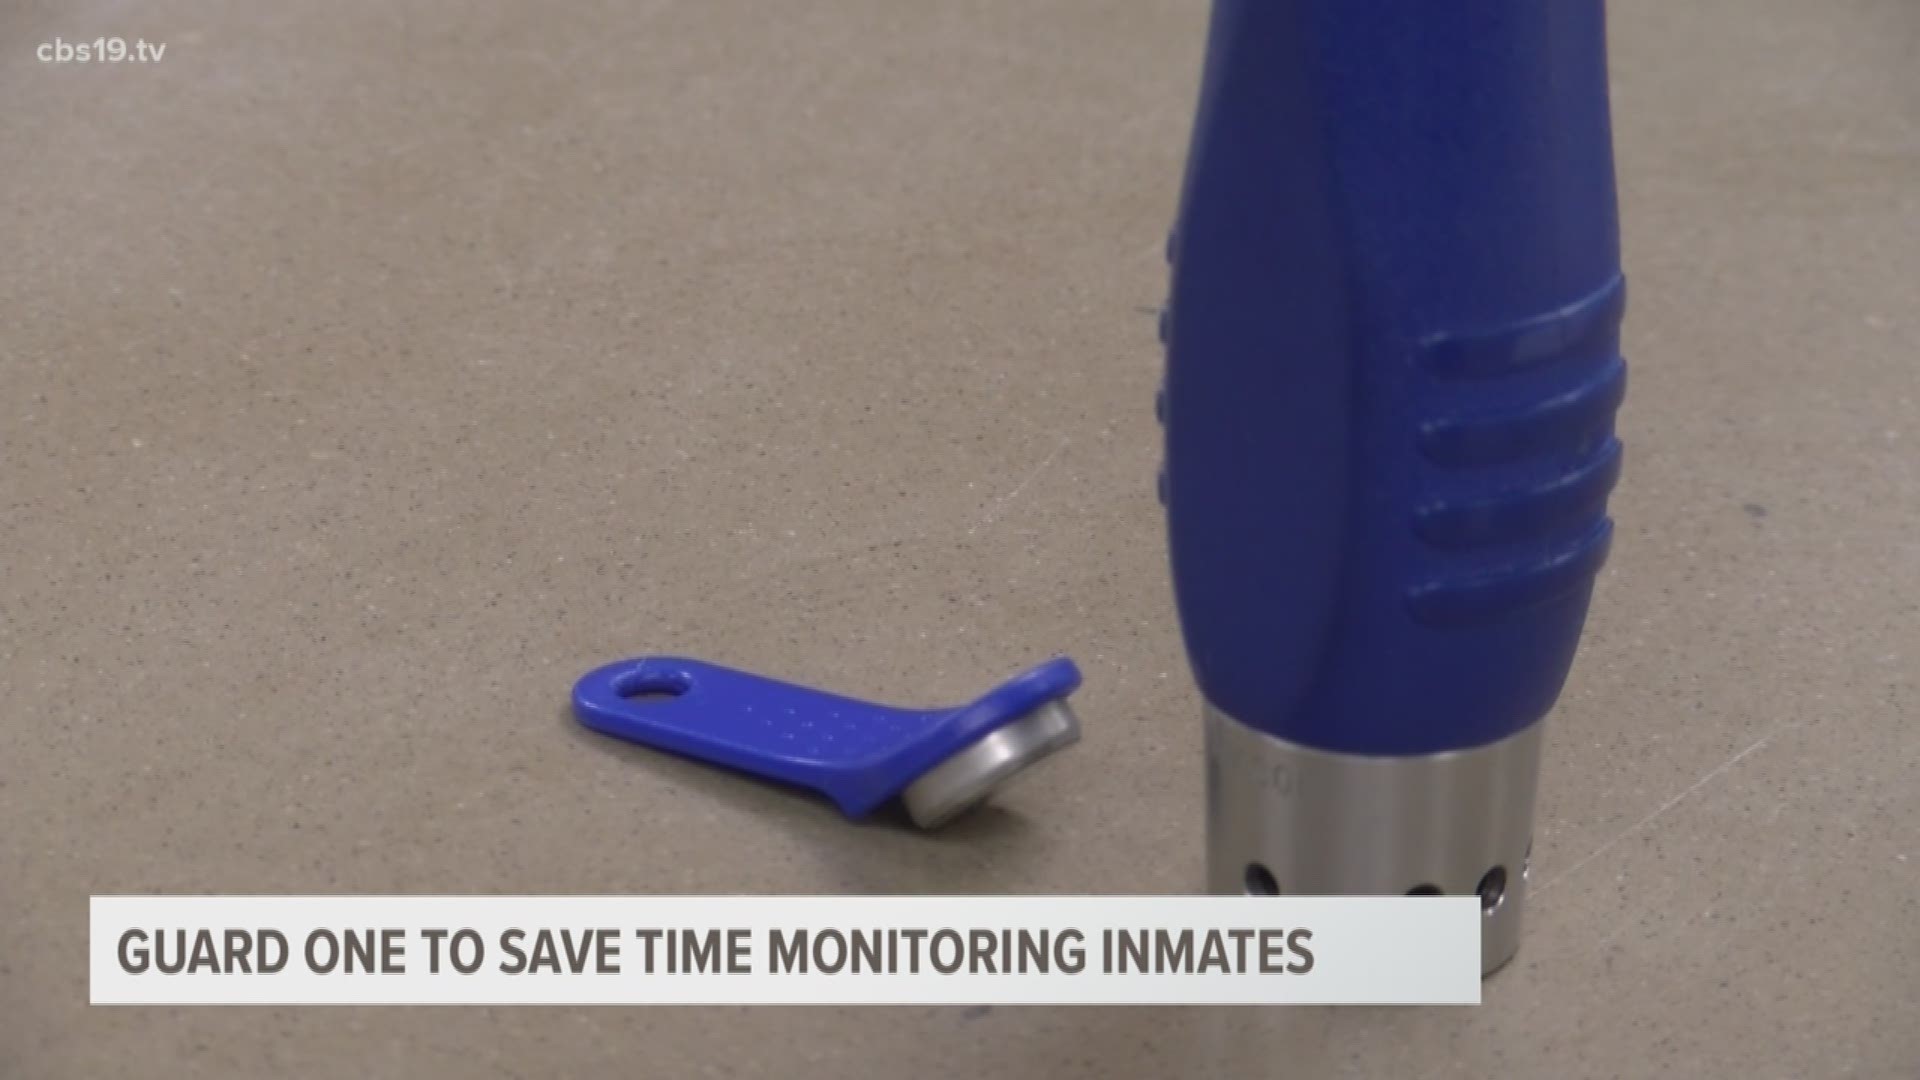 'Guard One' to save time monitoring inmates at Smith County Jail